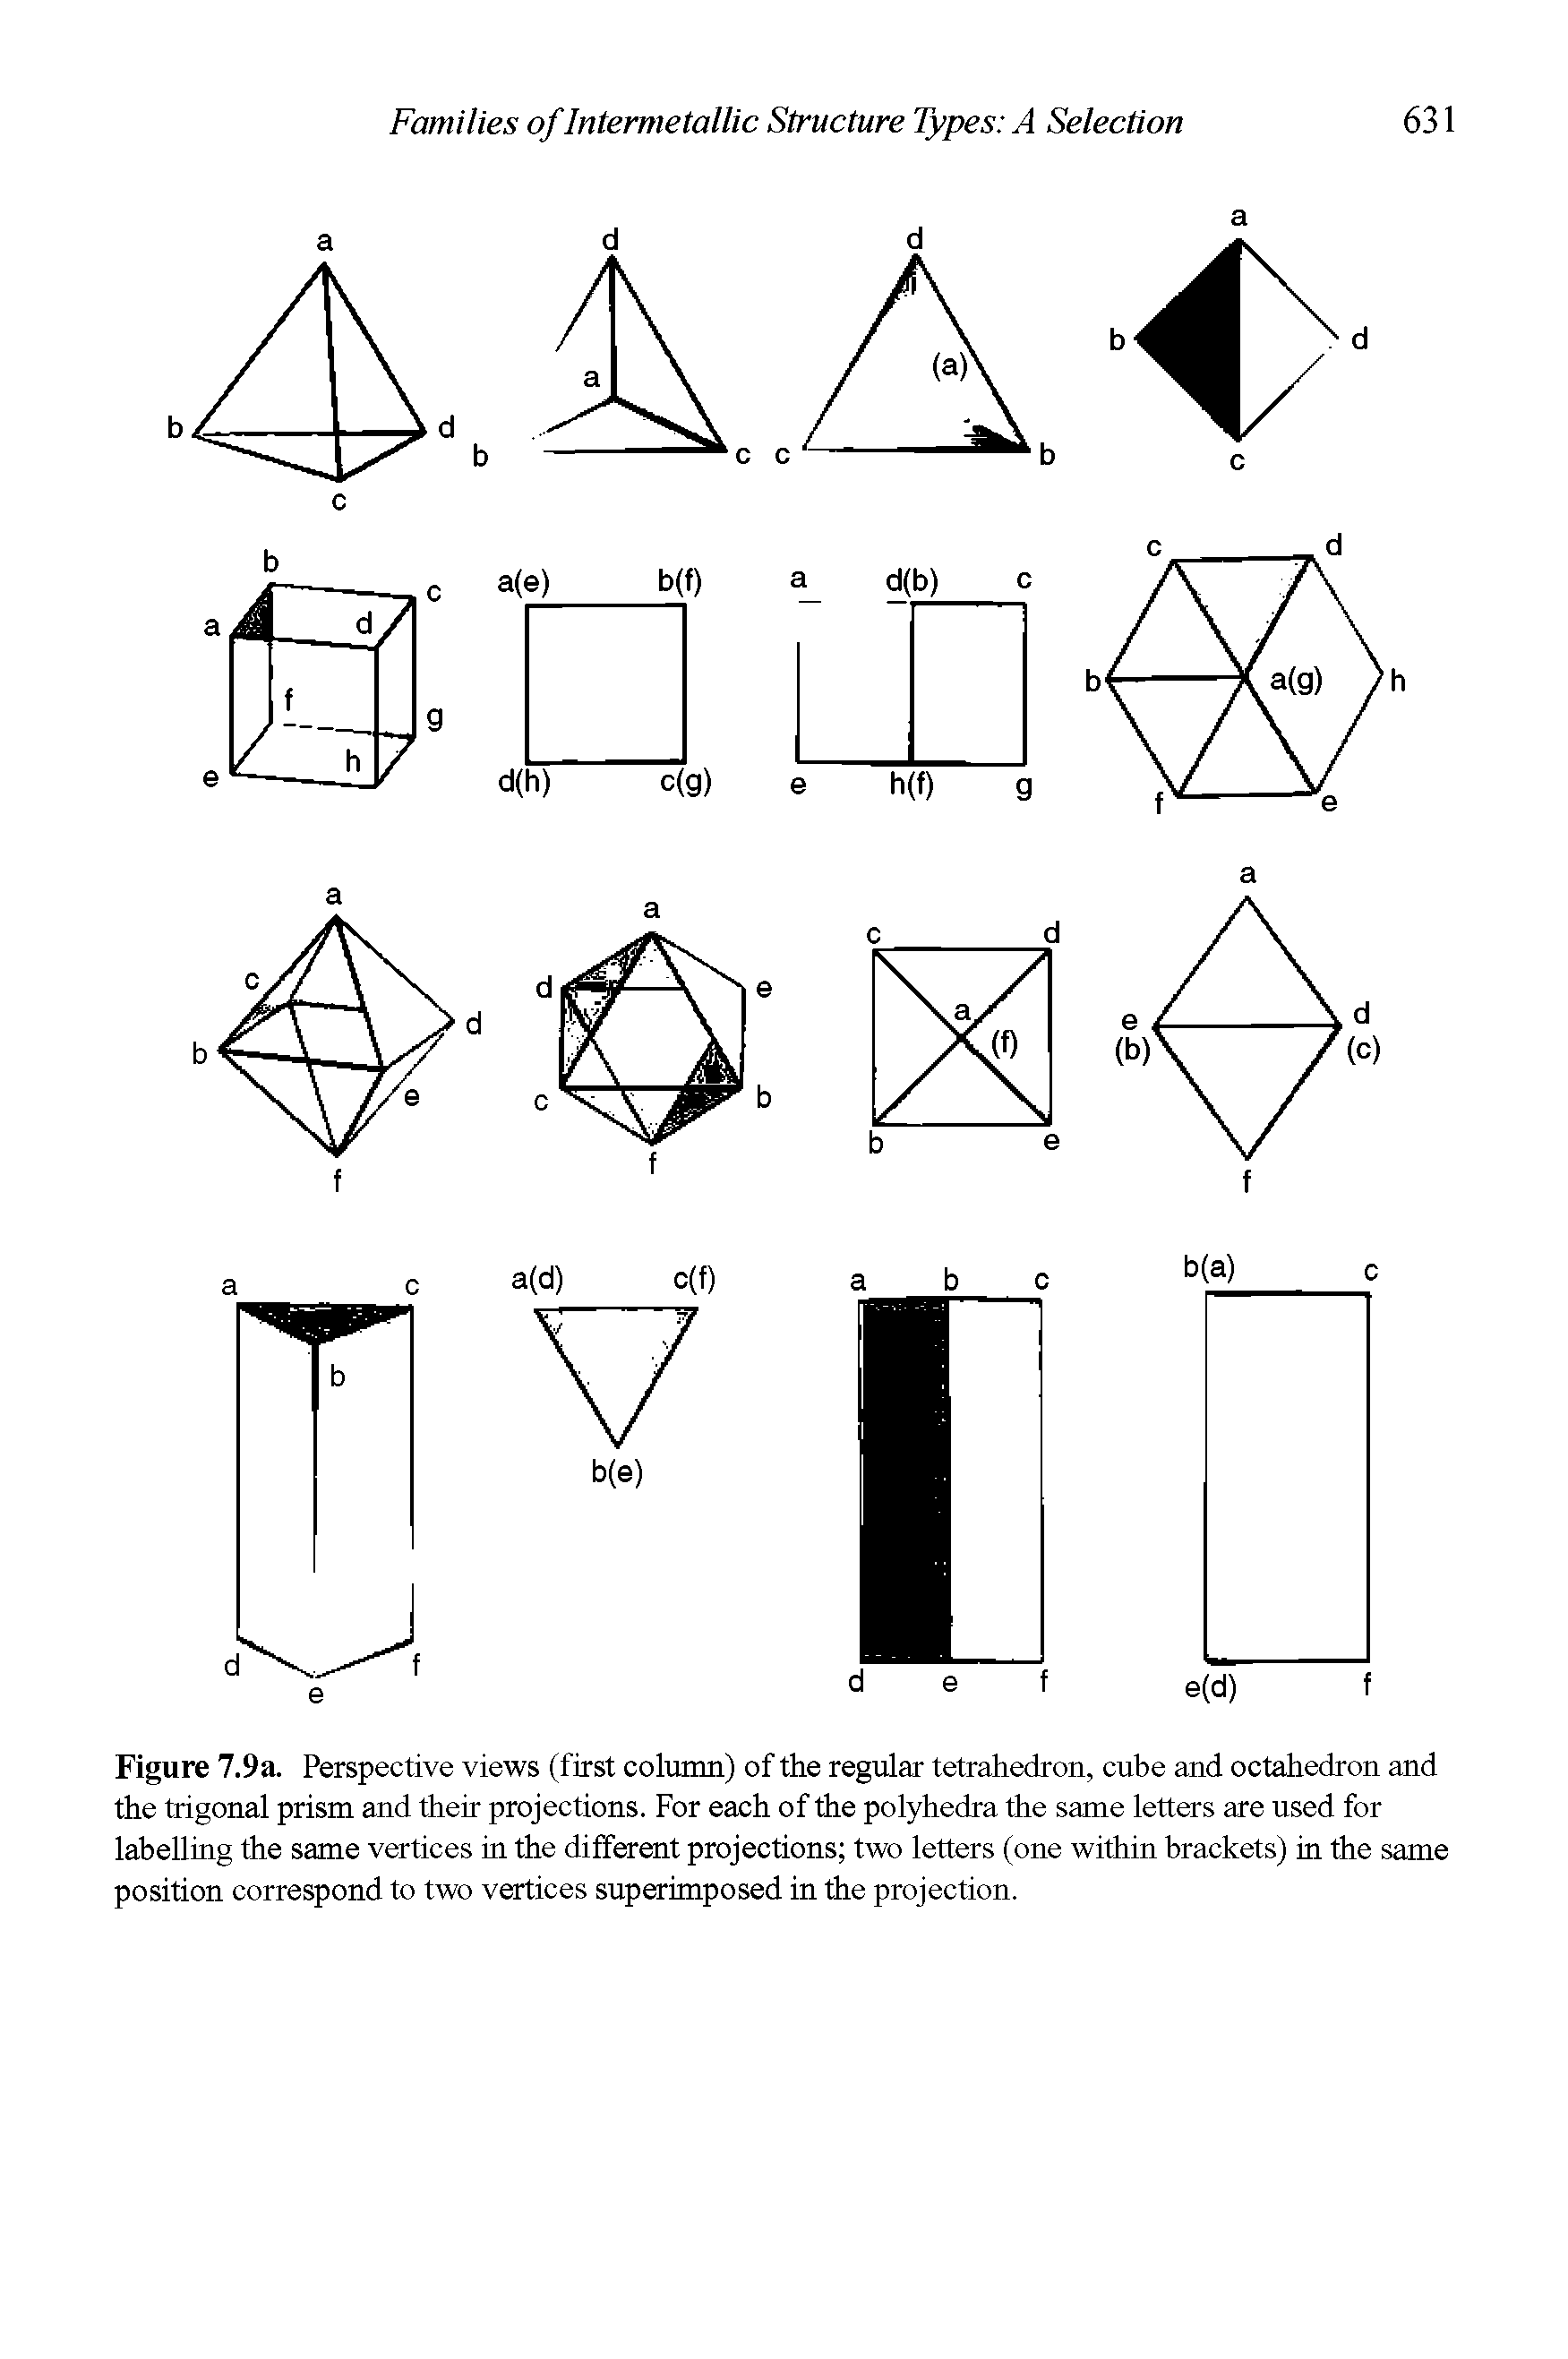 Figure 7.9a. Perspective views (first column) of the regular tetrahedron, cube and octahedron and the trigonal prism and their projections. For each of the polyhedra the same letters are used for labelling the same vertices in the different projections two letters (one within brackets) in the same position correspond to two vertices superimposed in the projection.